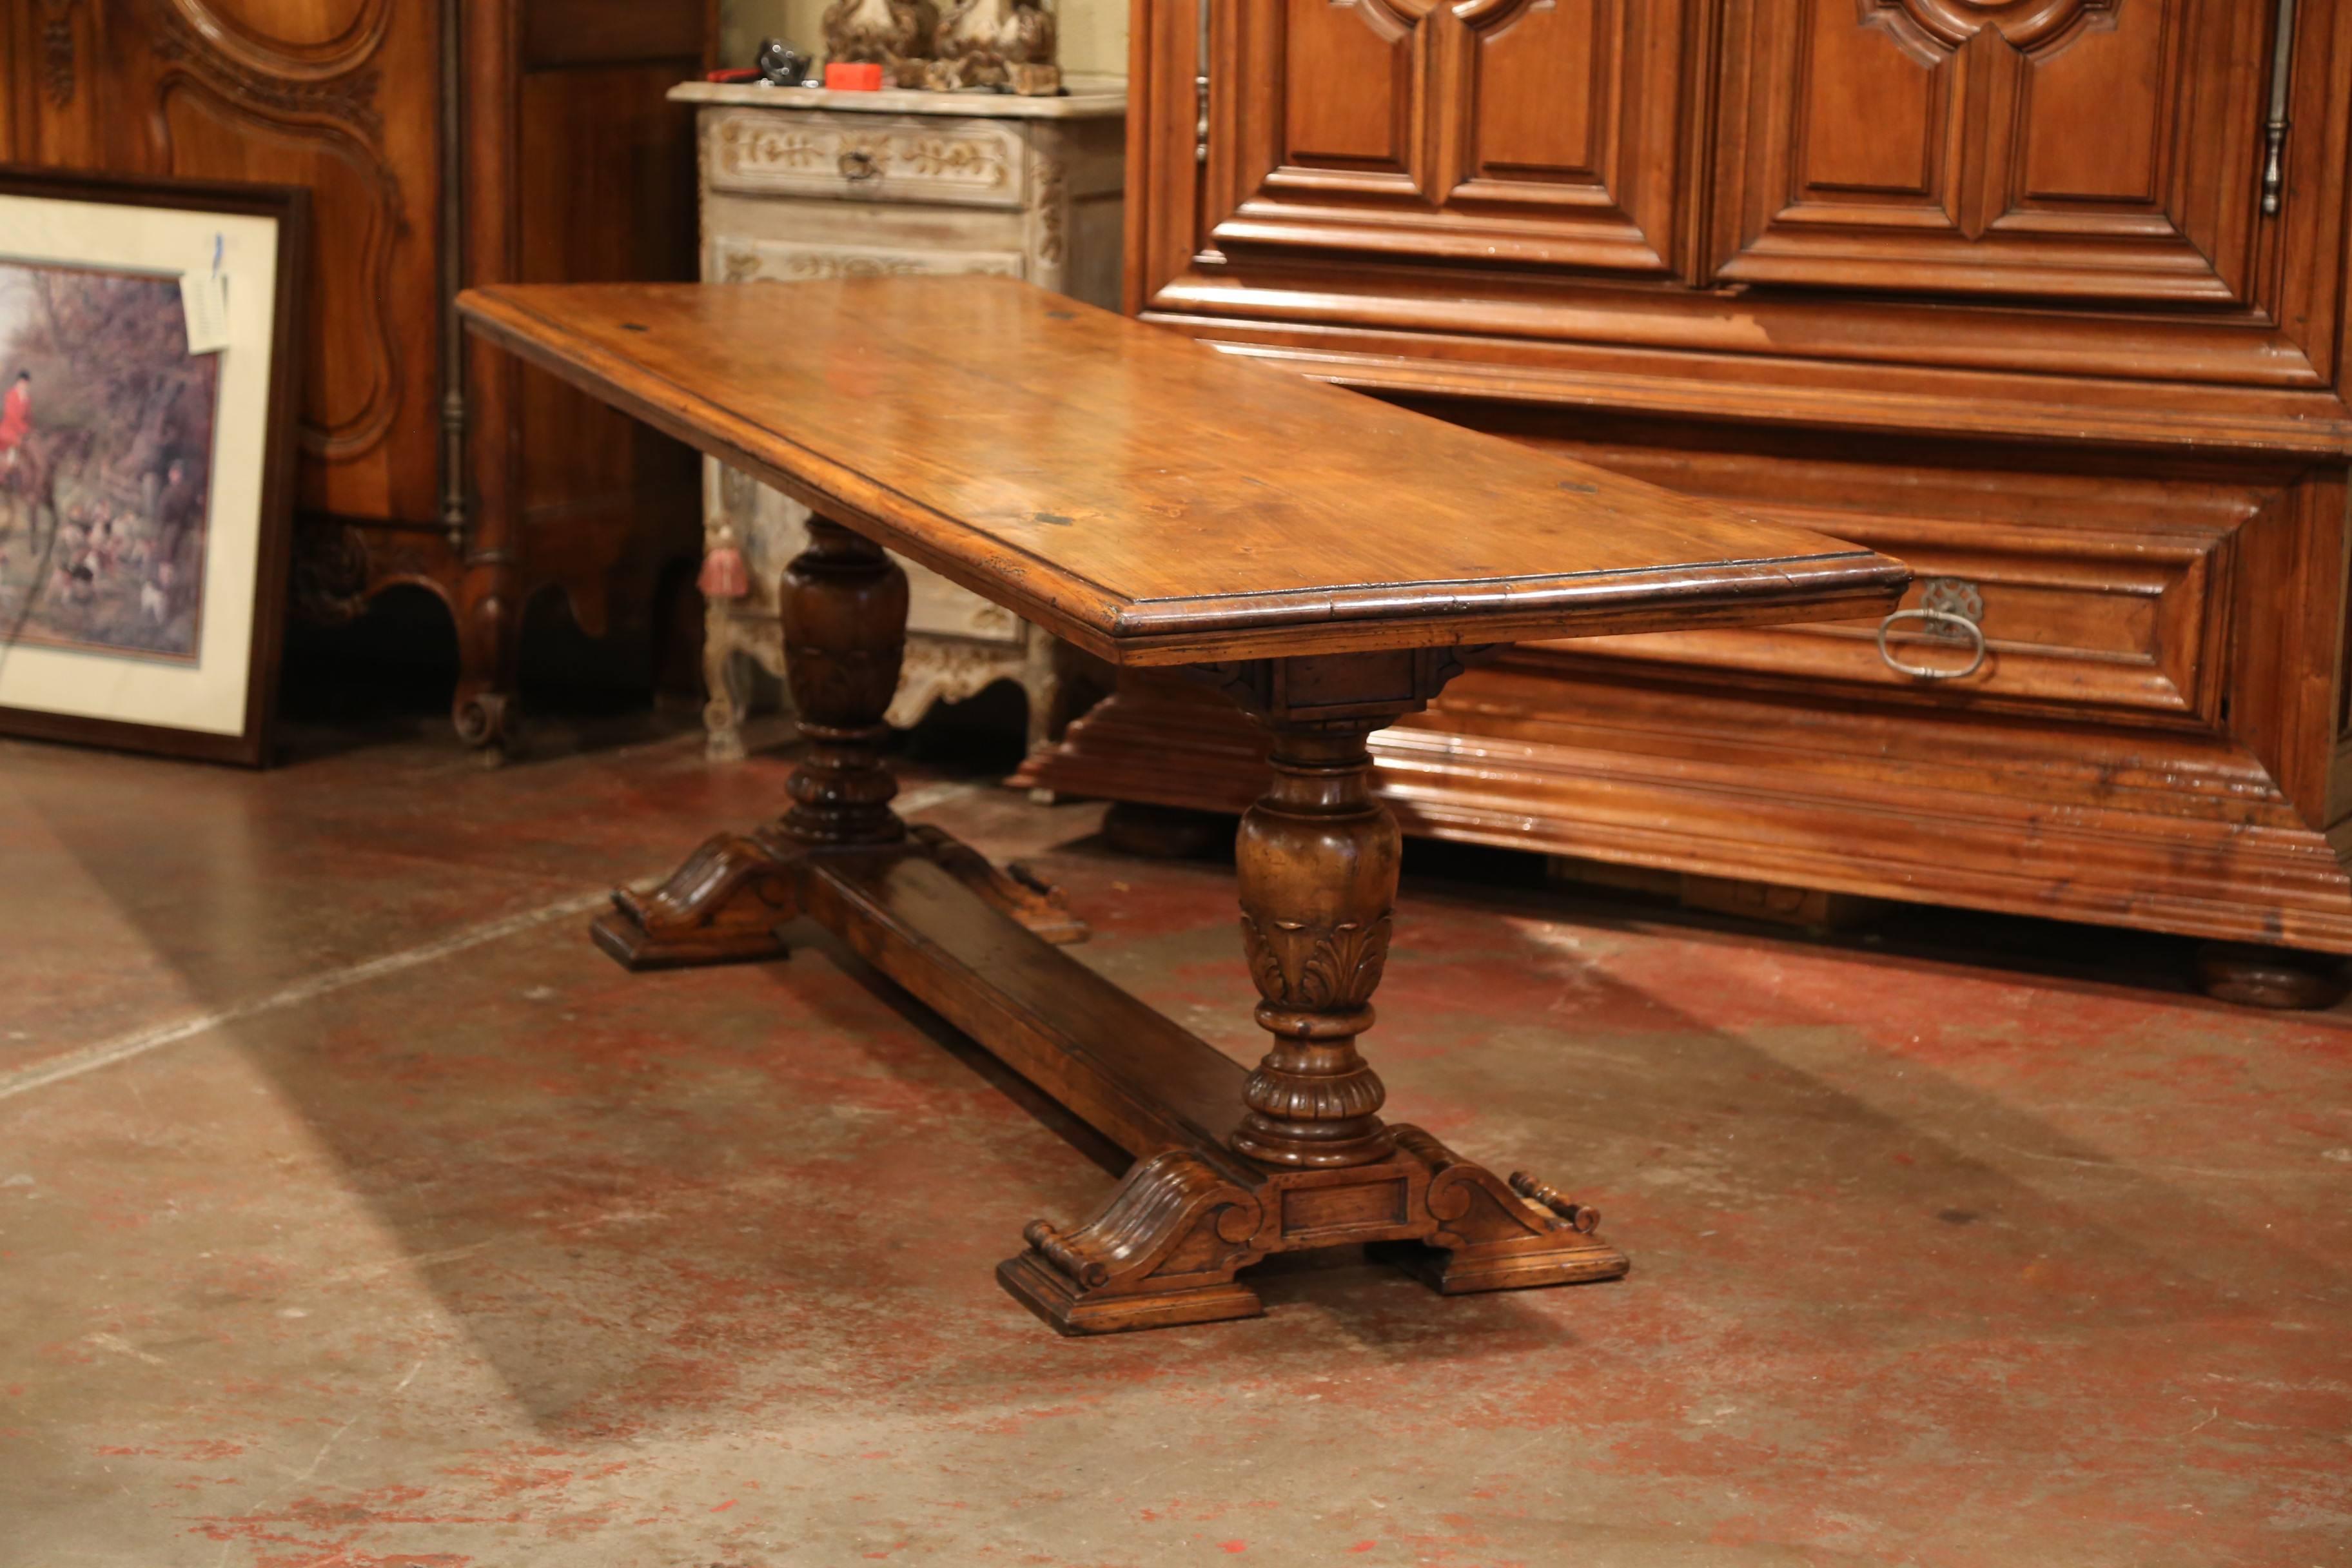 This large fruitwood dining room table was crafted in the Perigord region of France, circa 1860. The long table features a solid plank top with four decorative diamond shape iron nails in each corner. The farm table has two hand-carved pedestal legs